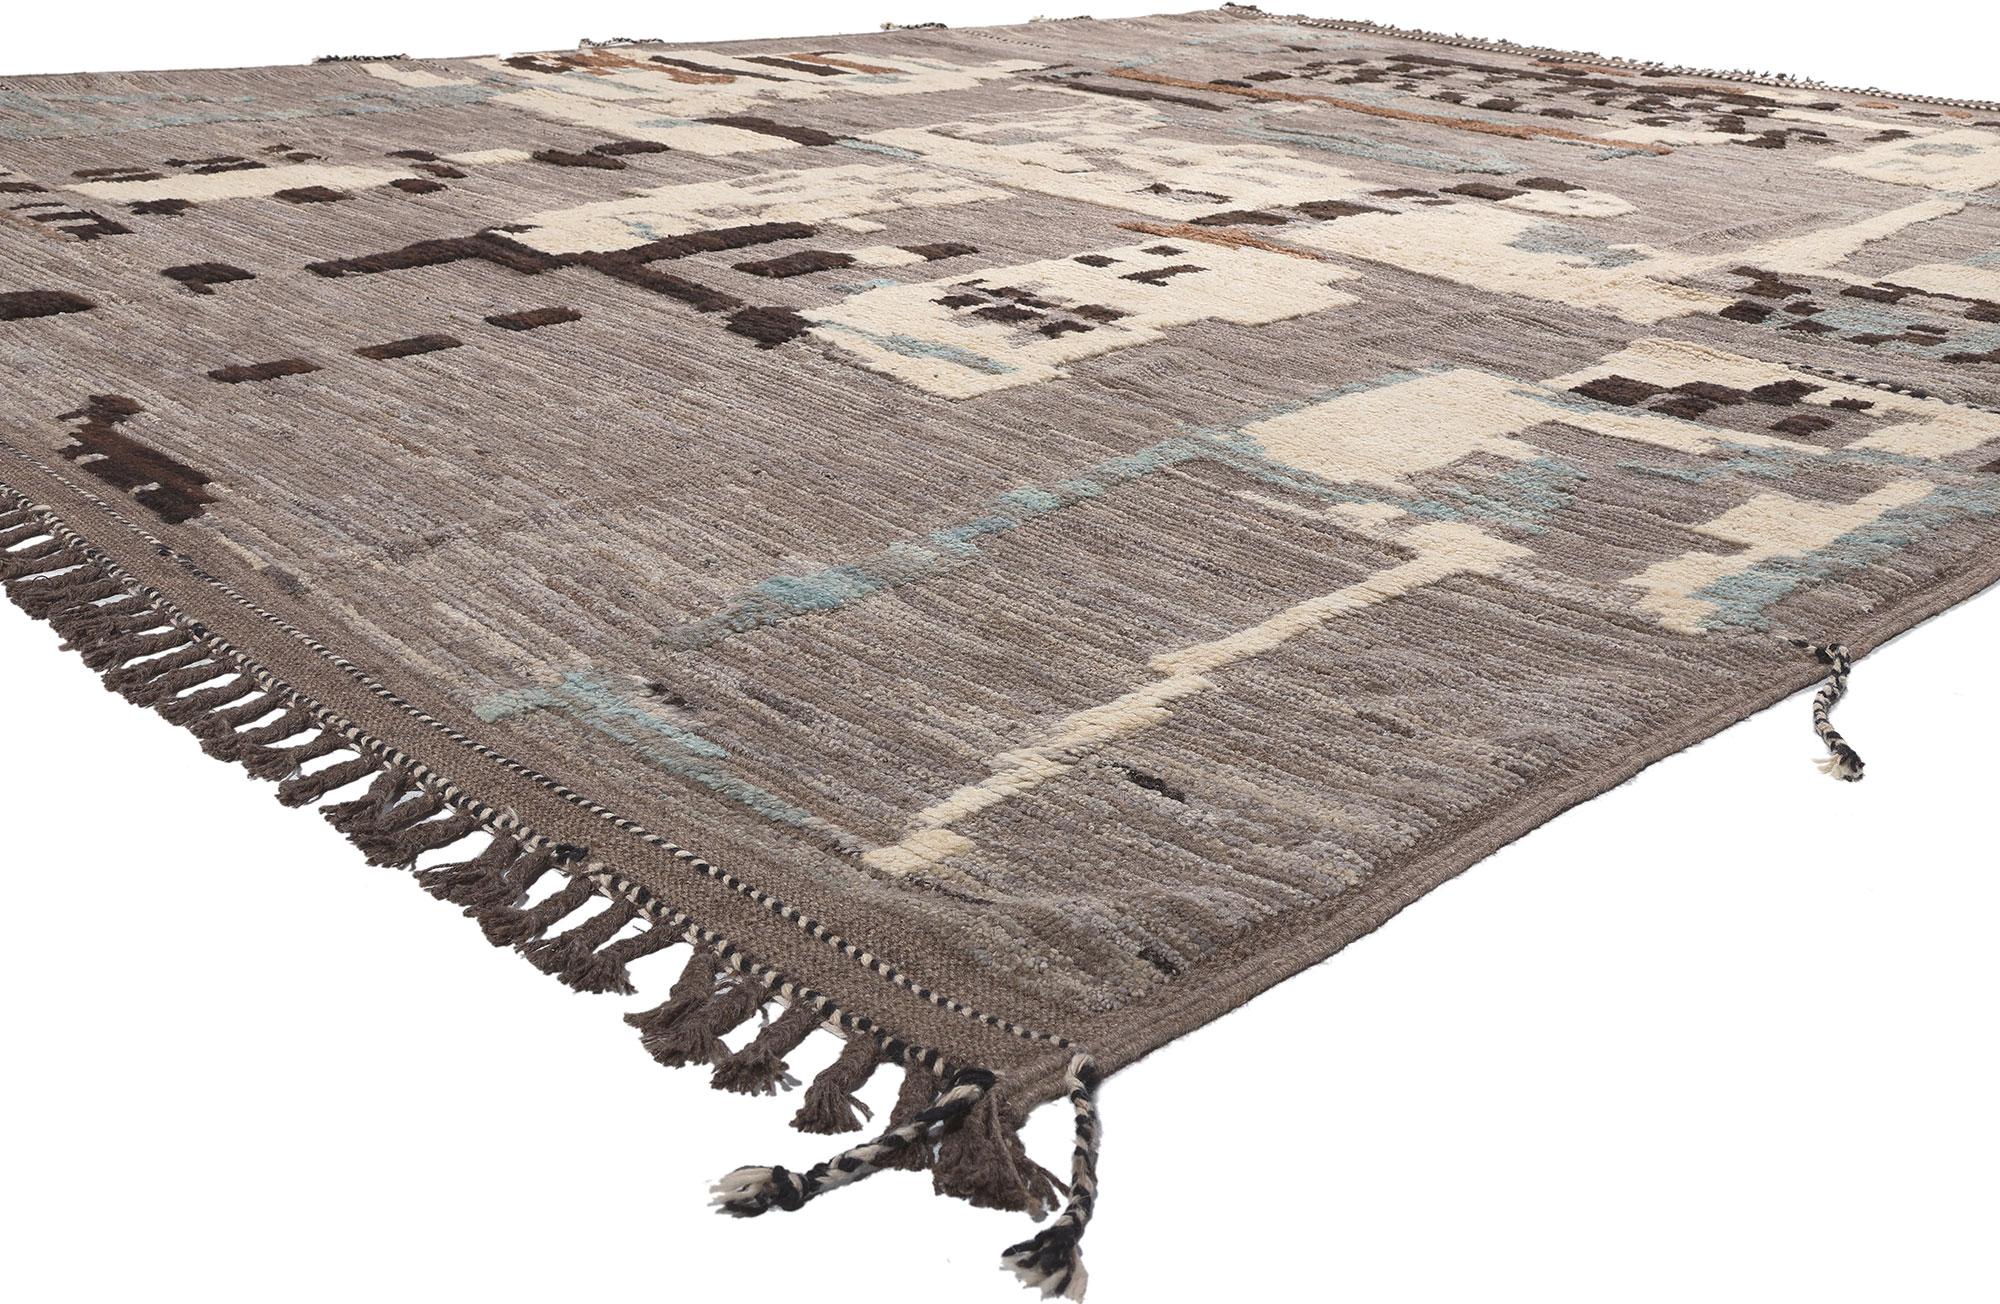 80980 Modern Moroccan Rug with Earth-Tone Colors, 12'00 x 15'09. Emanating Biophilic Design with incredible detail and texture, this large Moroccan high-low rug is a captivating vision of woven beauty. The raised design and earthy colorway woven